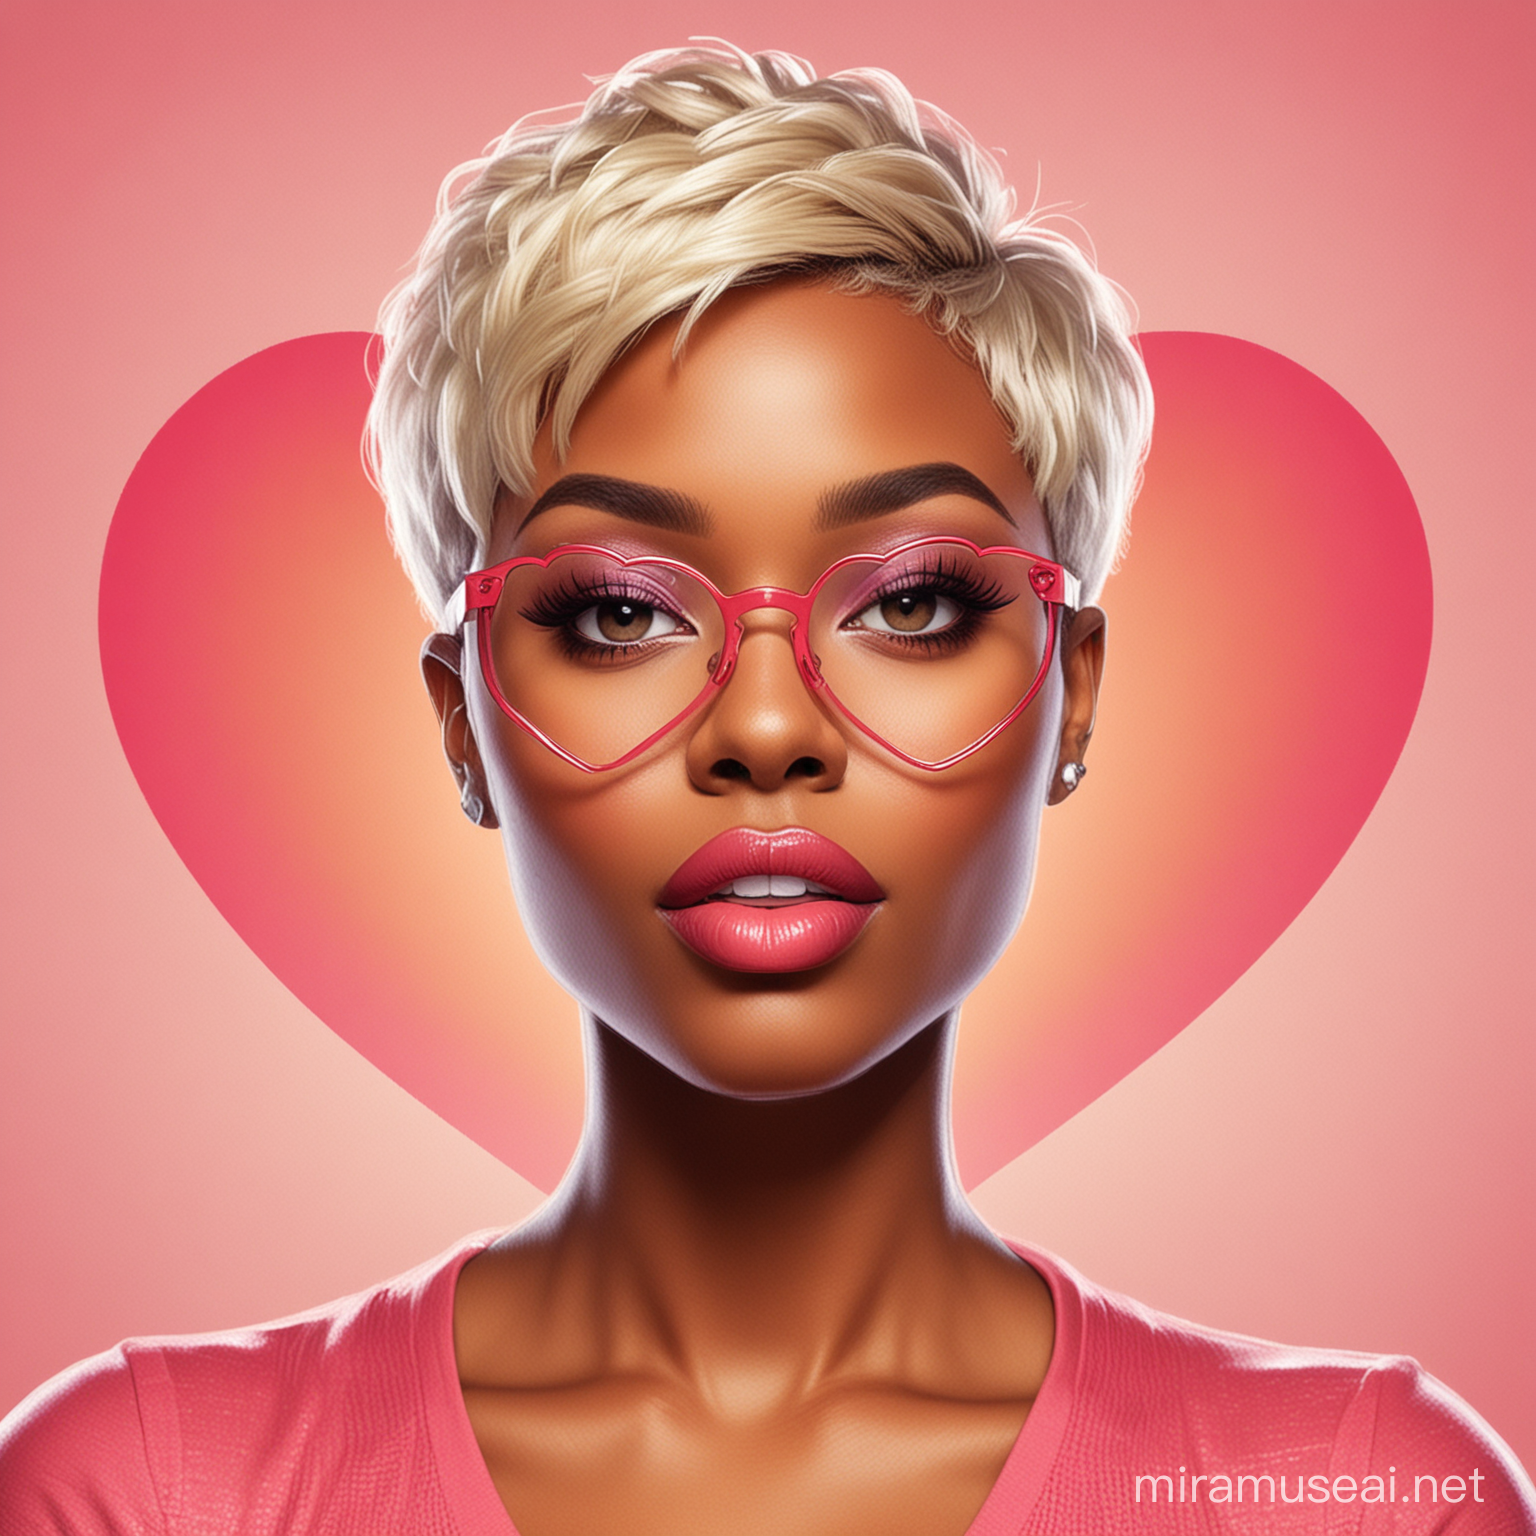 an illustrated depiction of an African American woman in her mid-30s with a short pixie blonde haircut. She could be wearing heart-shaped glasses, showcasing her big lips, and having a great figure. The illustration could be vibrant and dynamic, embodying the essence of the channel's diverse and engaging content. The background could be a blend of colors representing various topics like reality TV, global news, culture, and food to reflect the channel's wide-ranging discussions.
